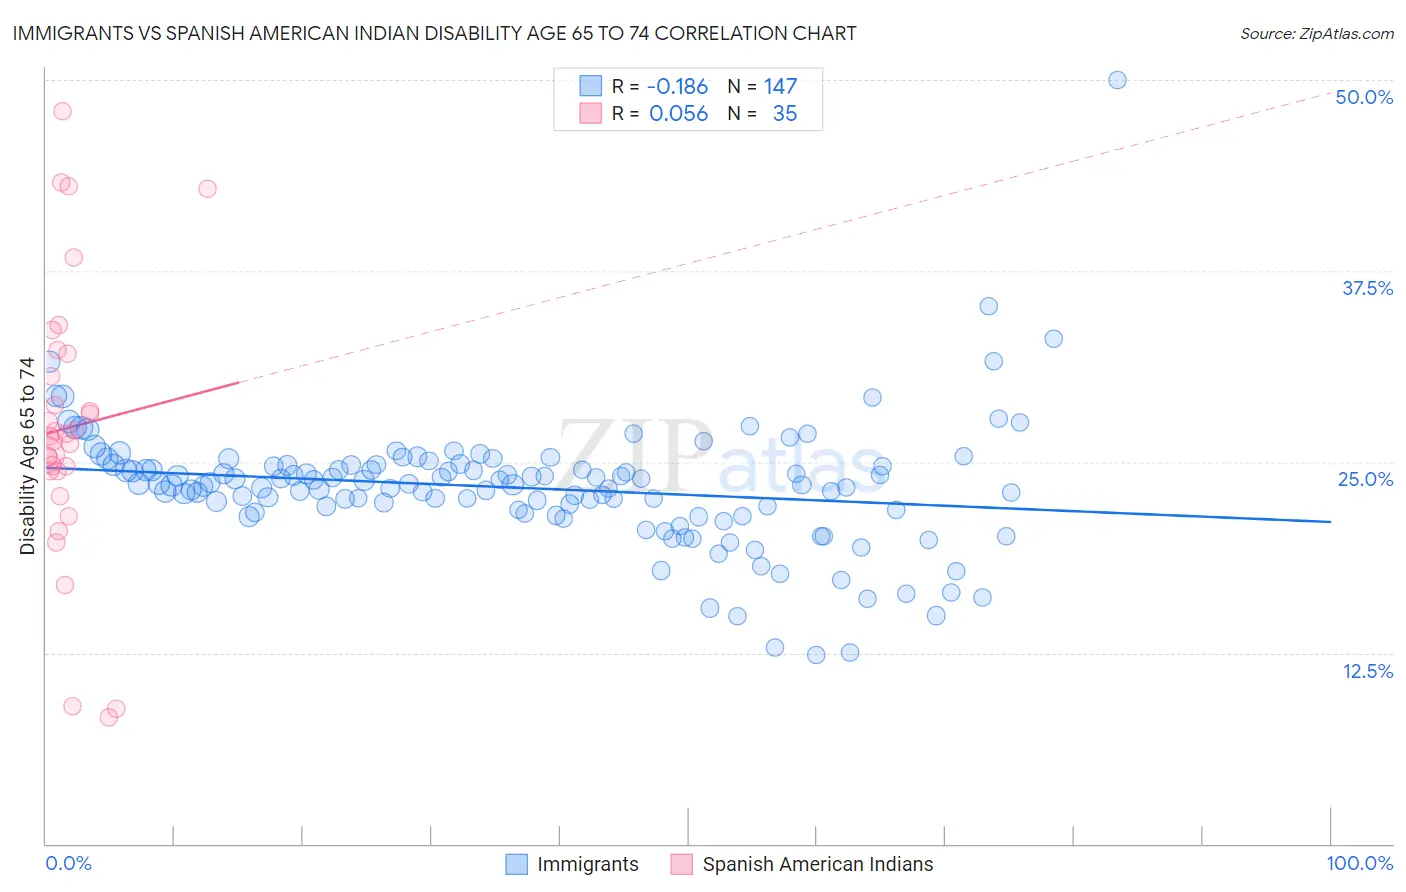 Immigrants vs Spanish American Indian Disability Age 65 to 74